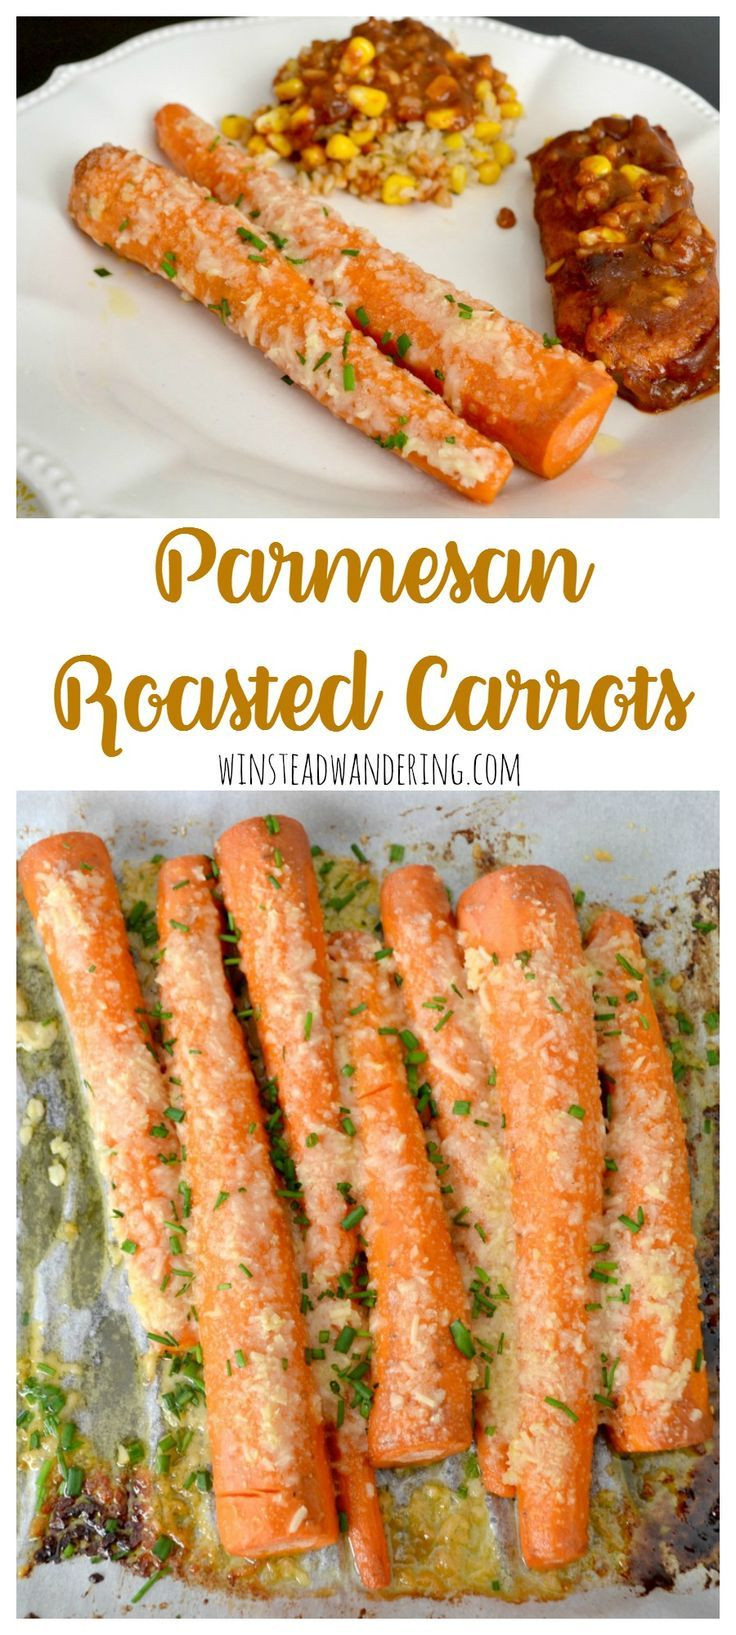 Fancy Side Dishes
 Parmesan Roasted Carrots